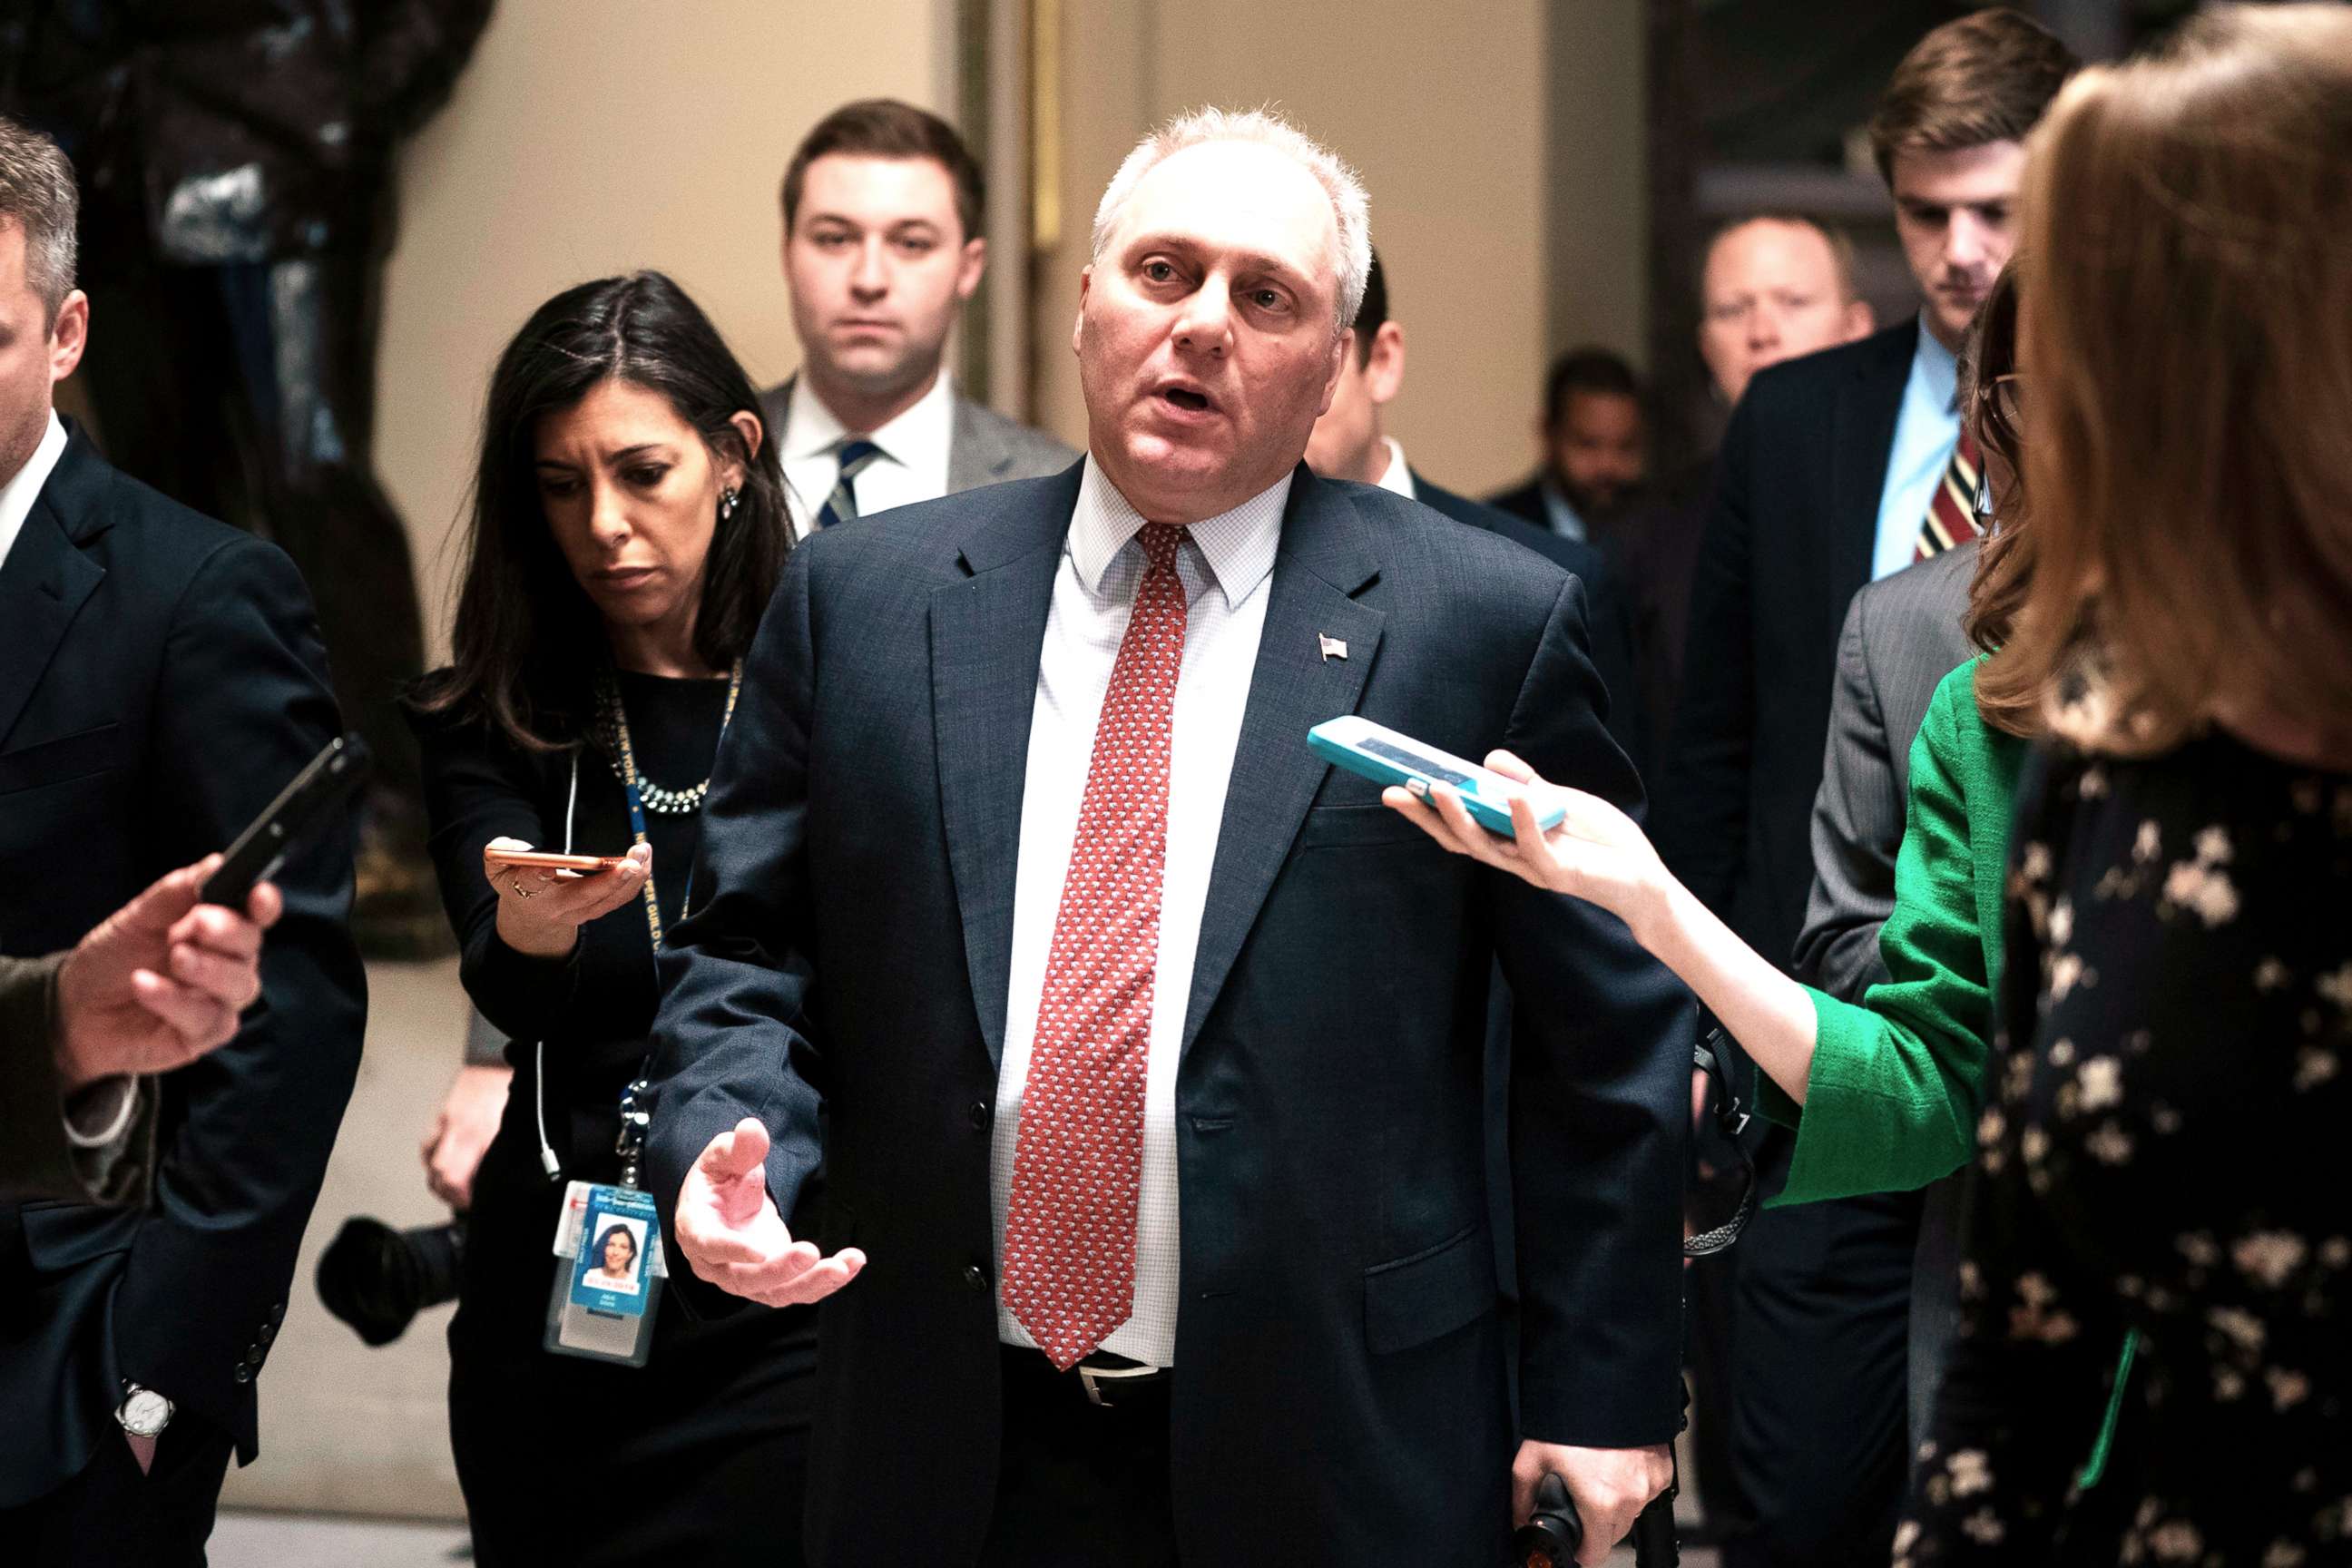 PHOTO: Republican Representative from Louisiana Steve Scalise heads to the House floor to negotiate a budget vote to avert a government shutdown in the U.S. Capitol in Washington, D.C., Dec.20, 201